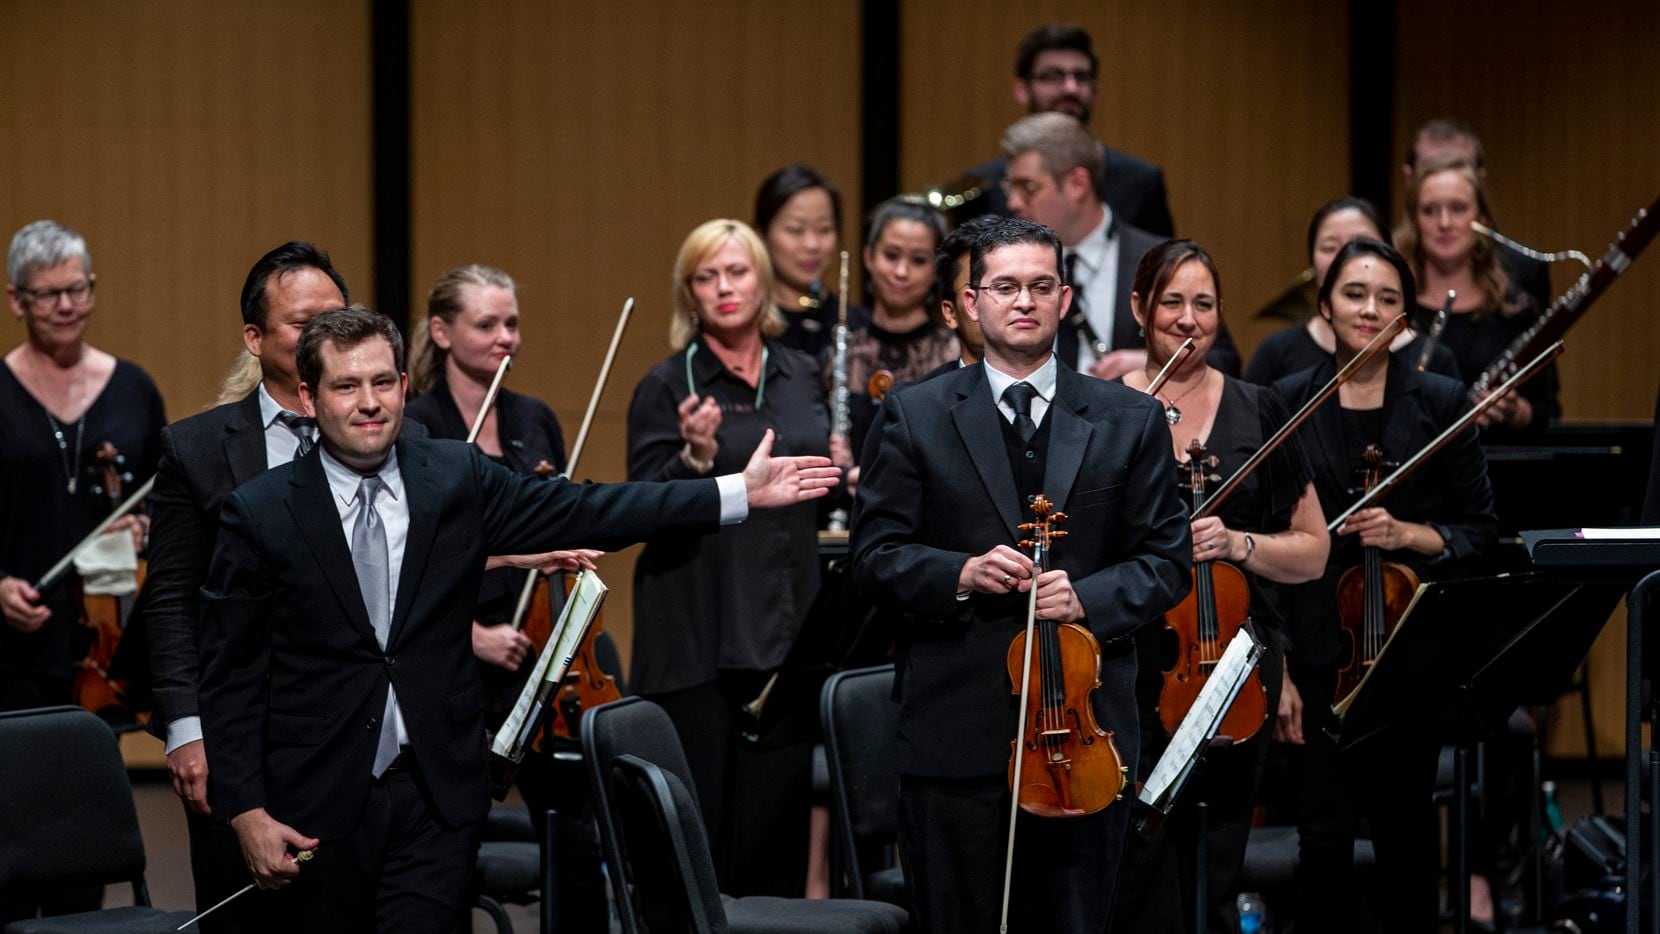 Conductor Richard McKay (left) directs the audiences applause towards violinist Simon Gollo during the season-opening concert by the Dallas Chamber Symphony at Moody Performance Hall in Dallas Oct. 22, 2019.